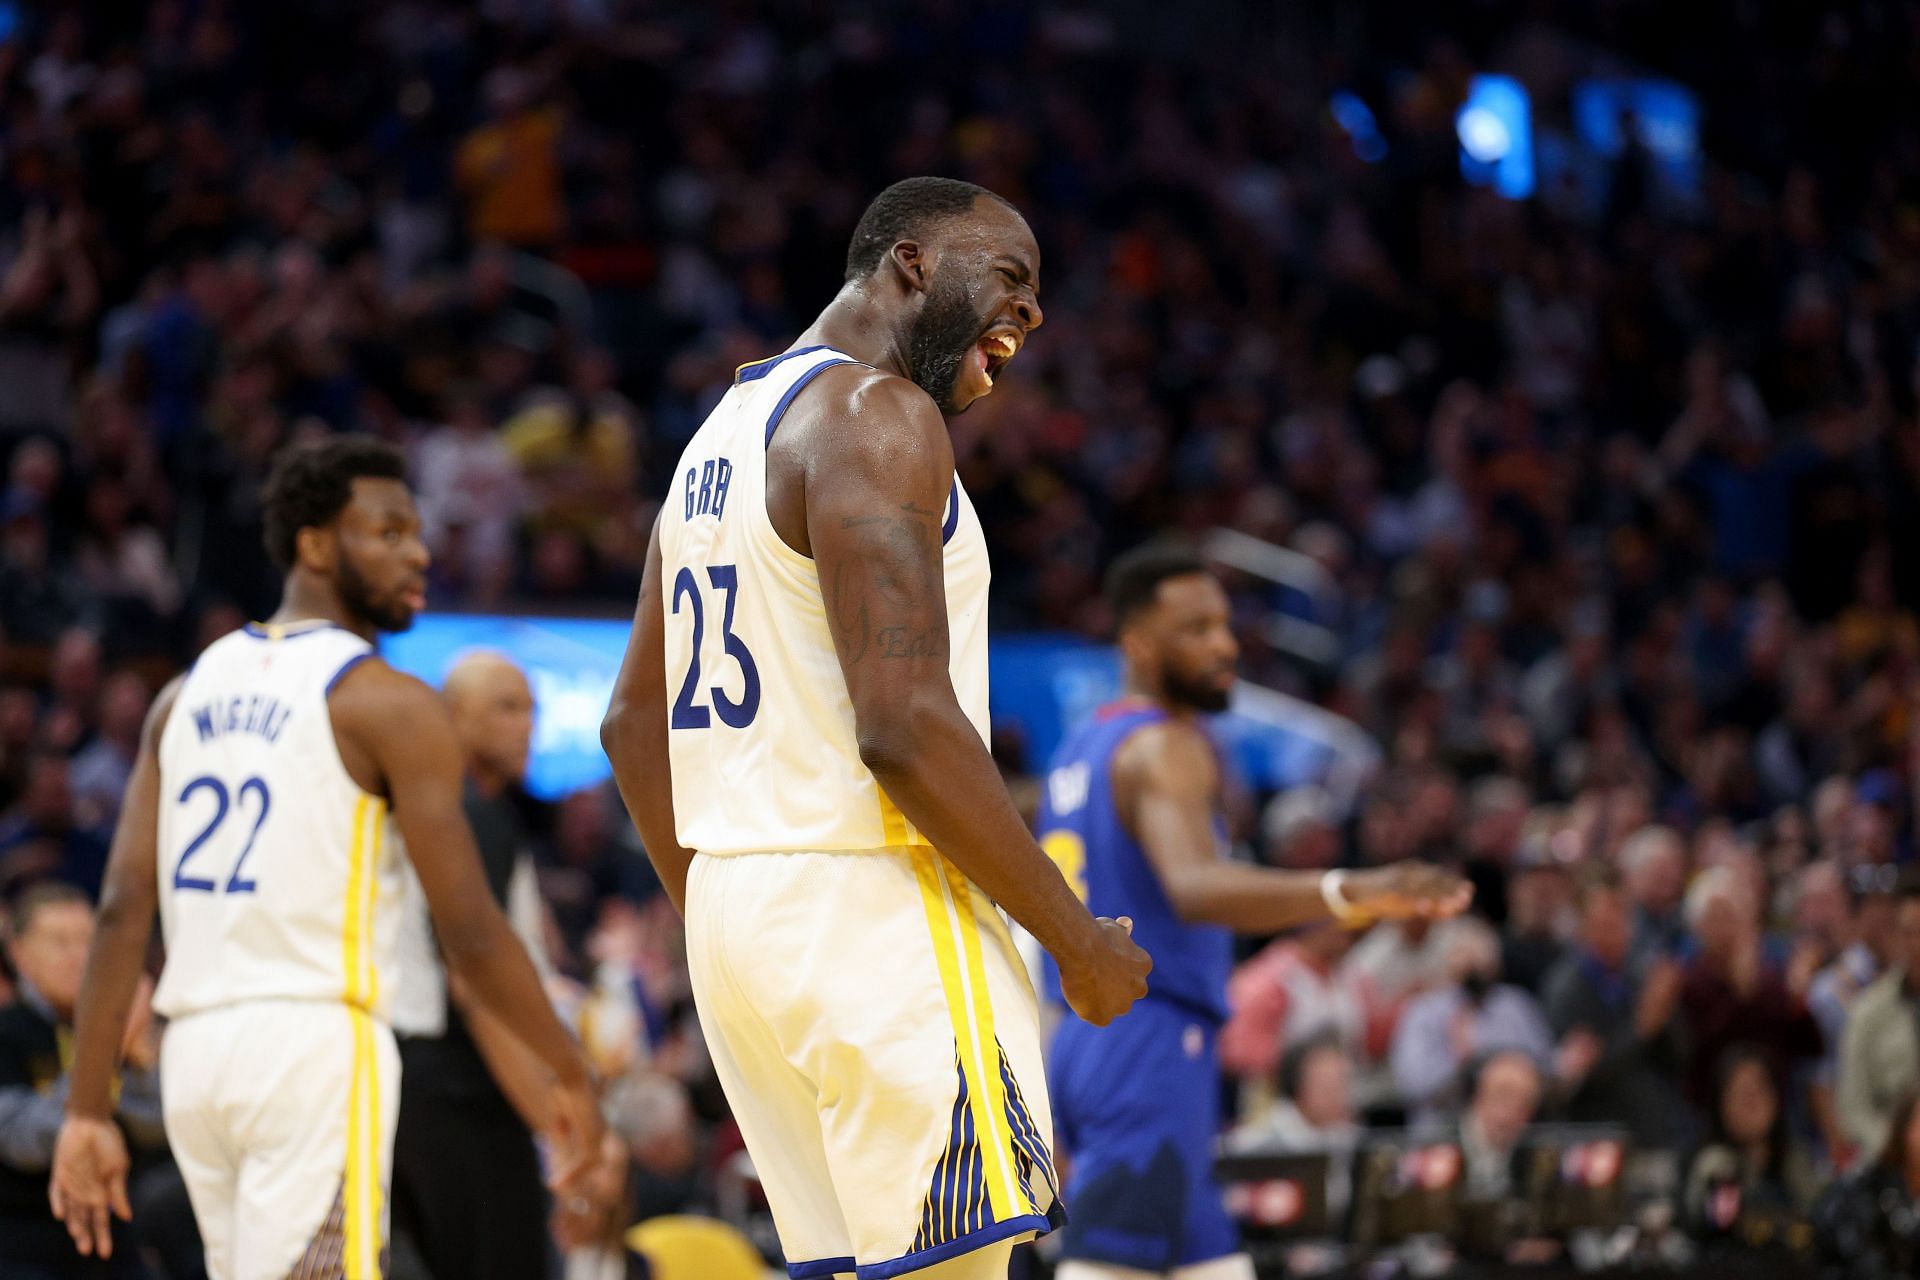 Draymond Green celebrates a play against the Denver Nuggets